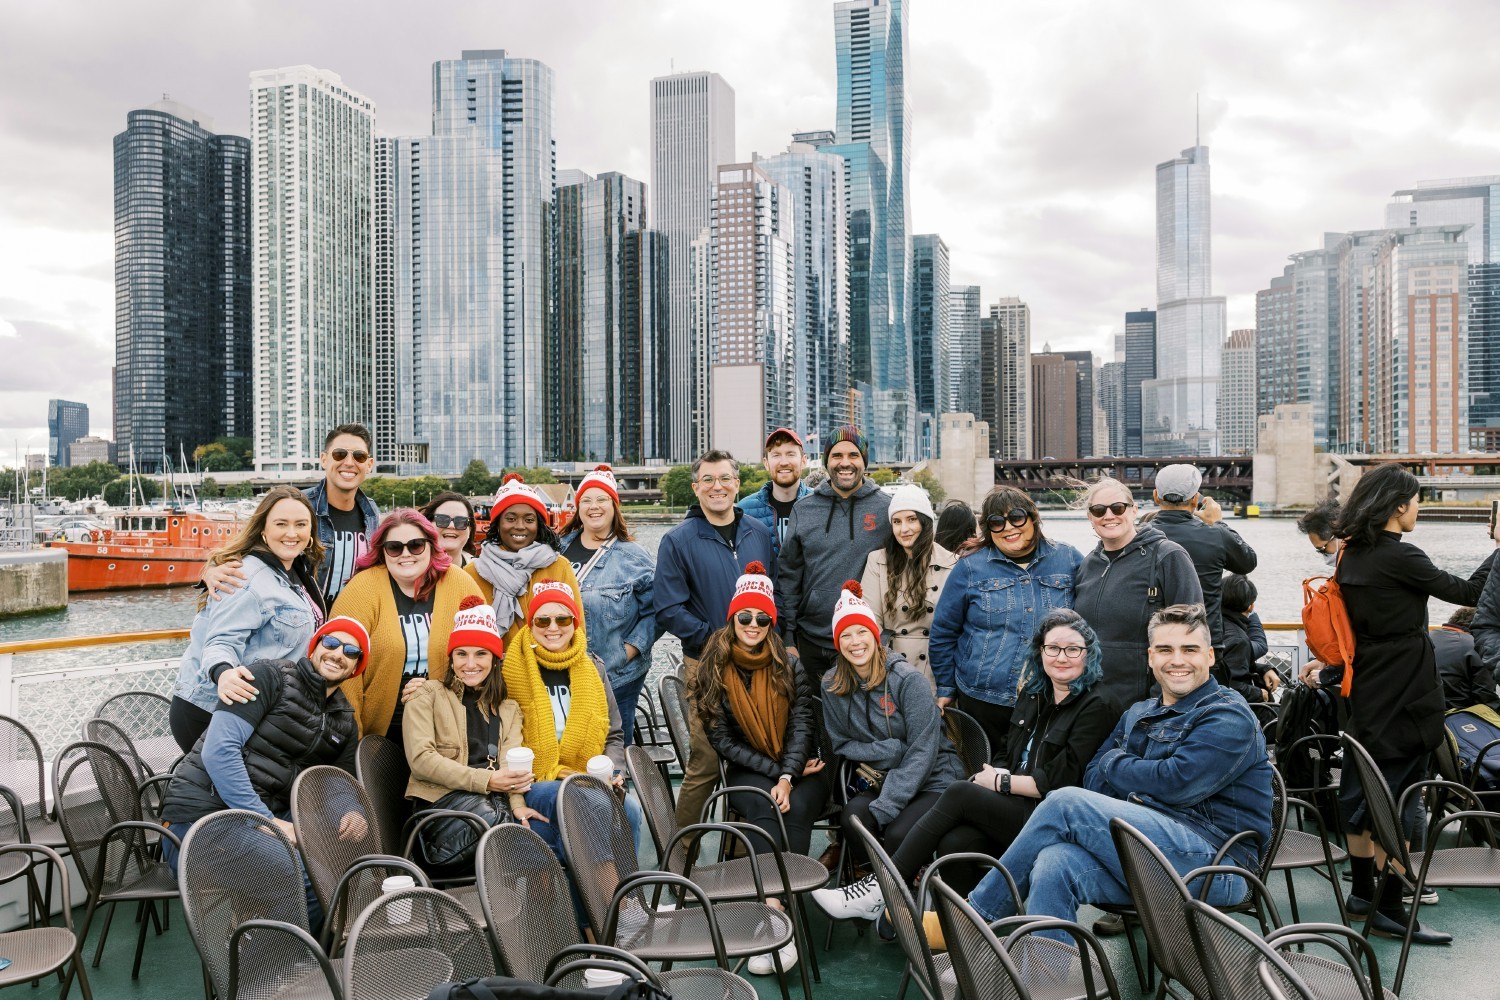 Studio 5 Team ignites growth at their bi-annual Camp Venture in Chicago while on the architectural boat tour!